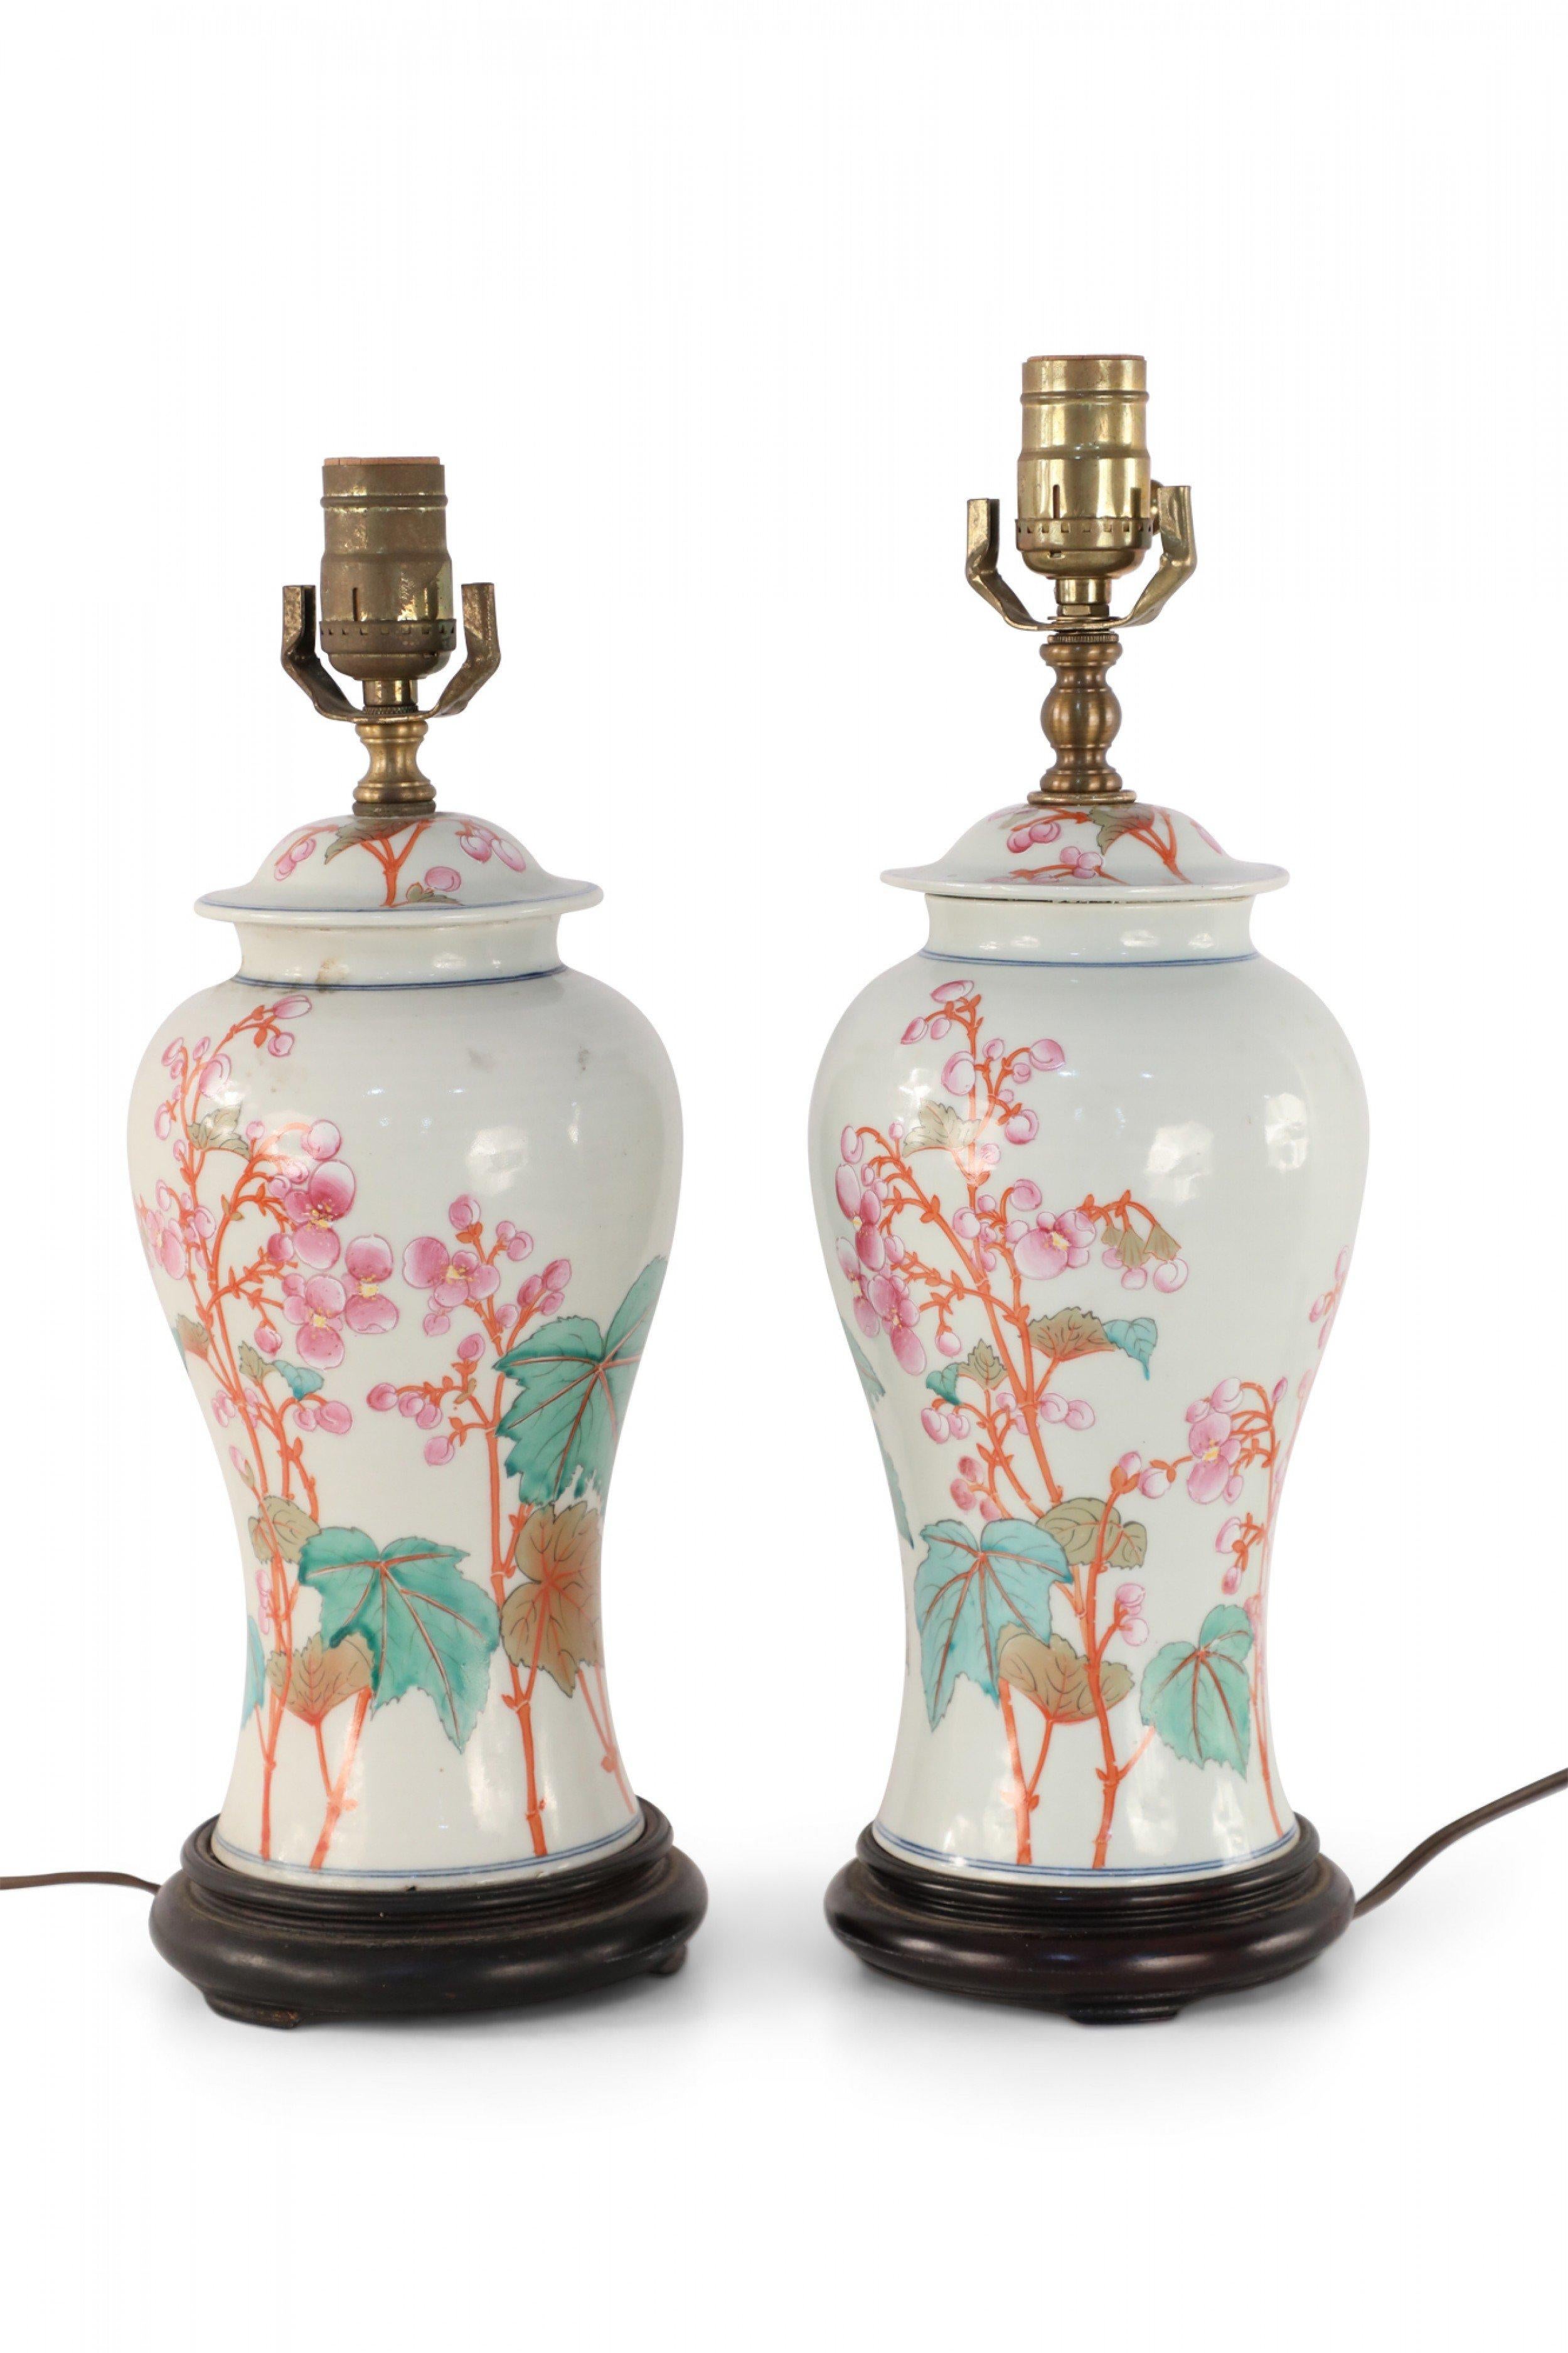 Pair of Chinese Off-White Orange and Pink Floral Motif Porcelain Table Lamps For Sale 2